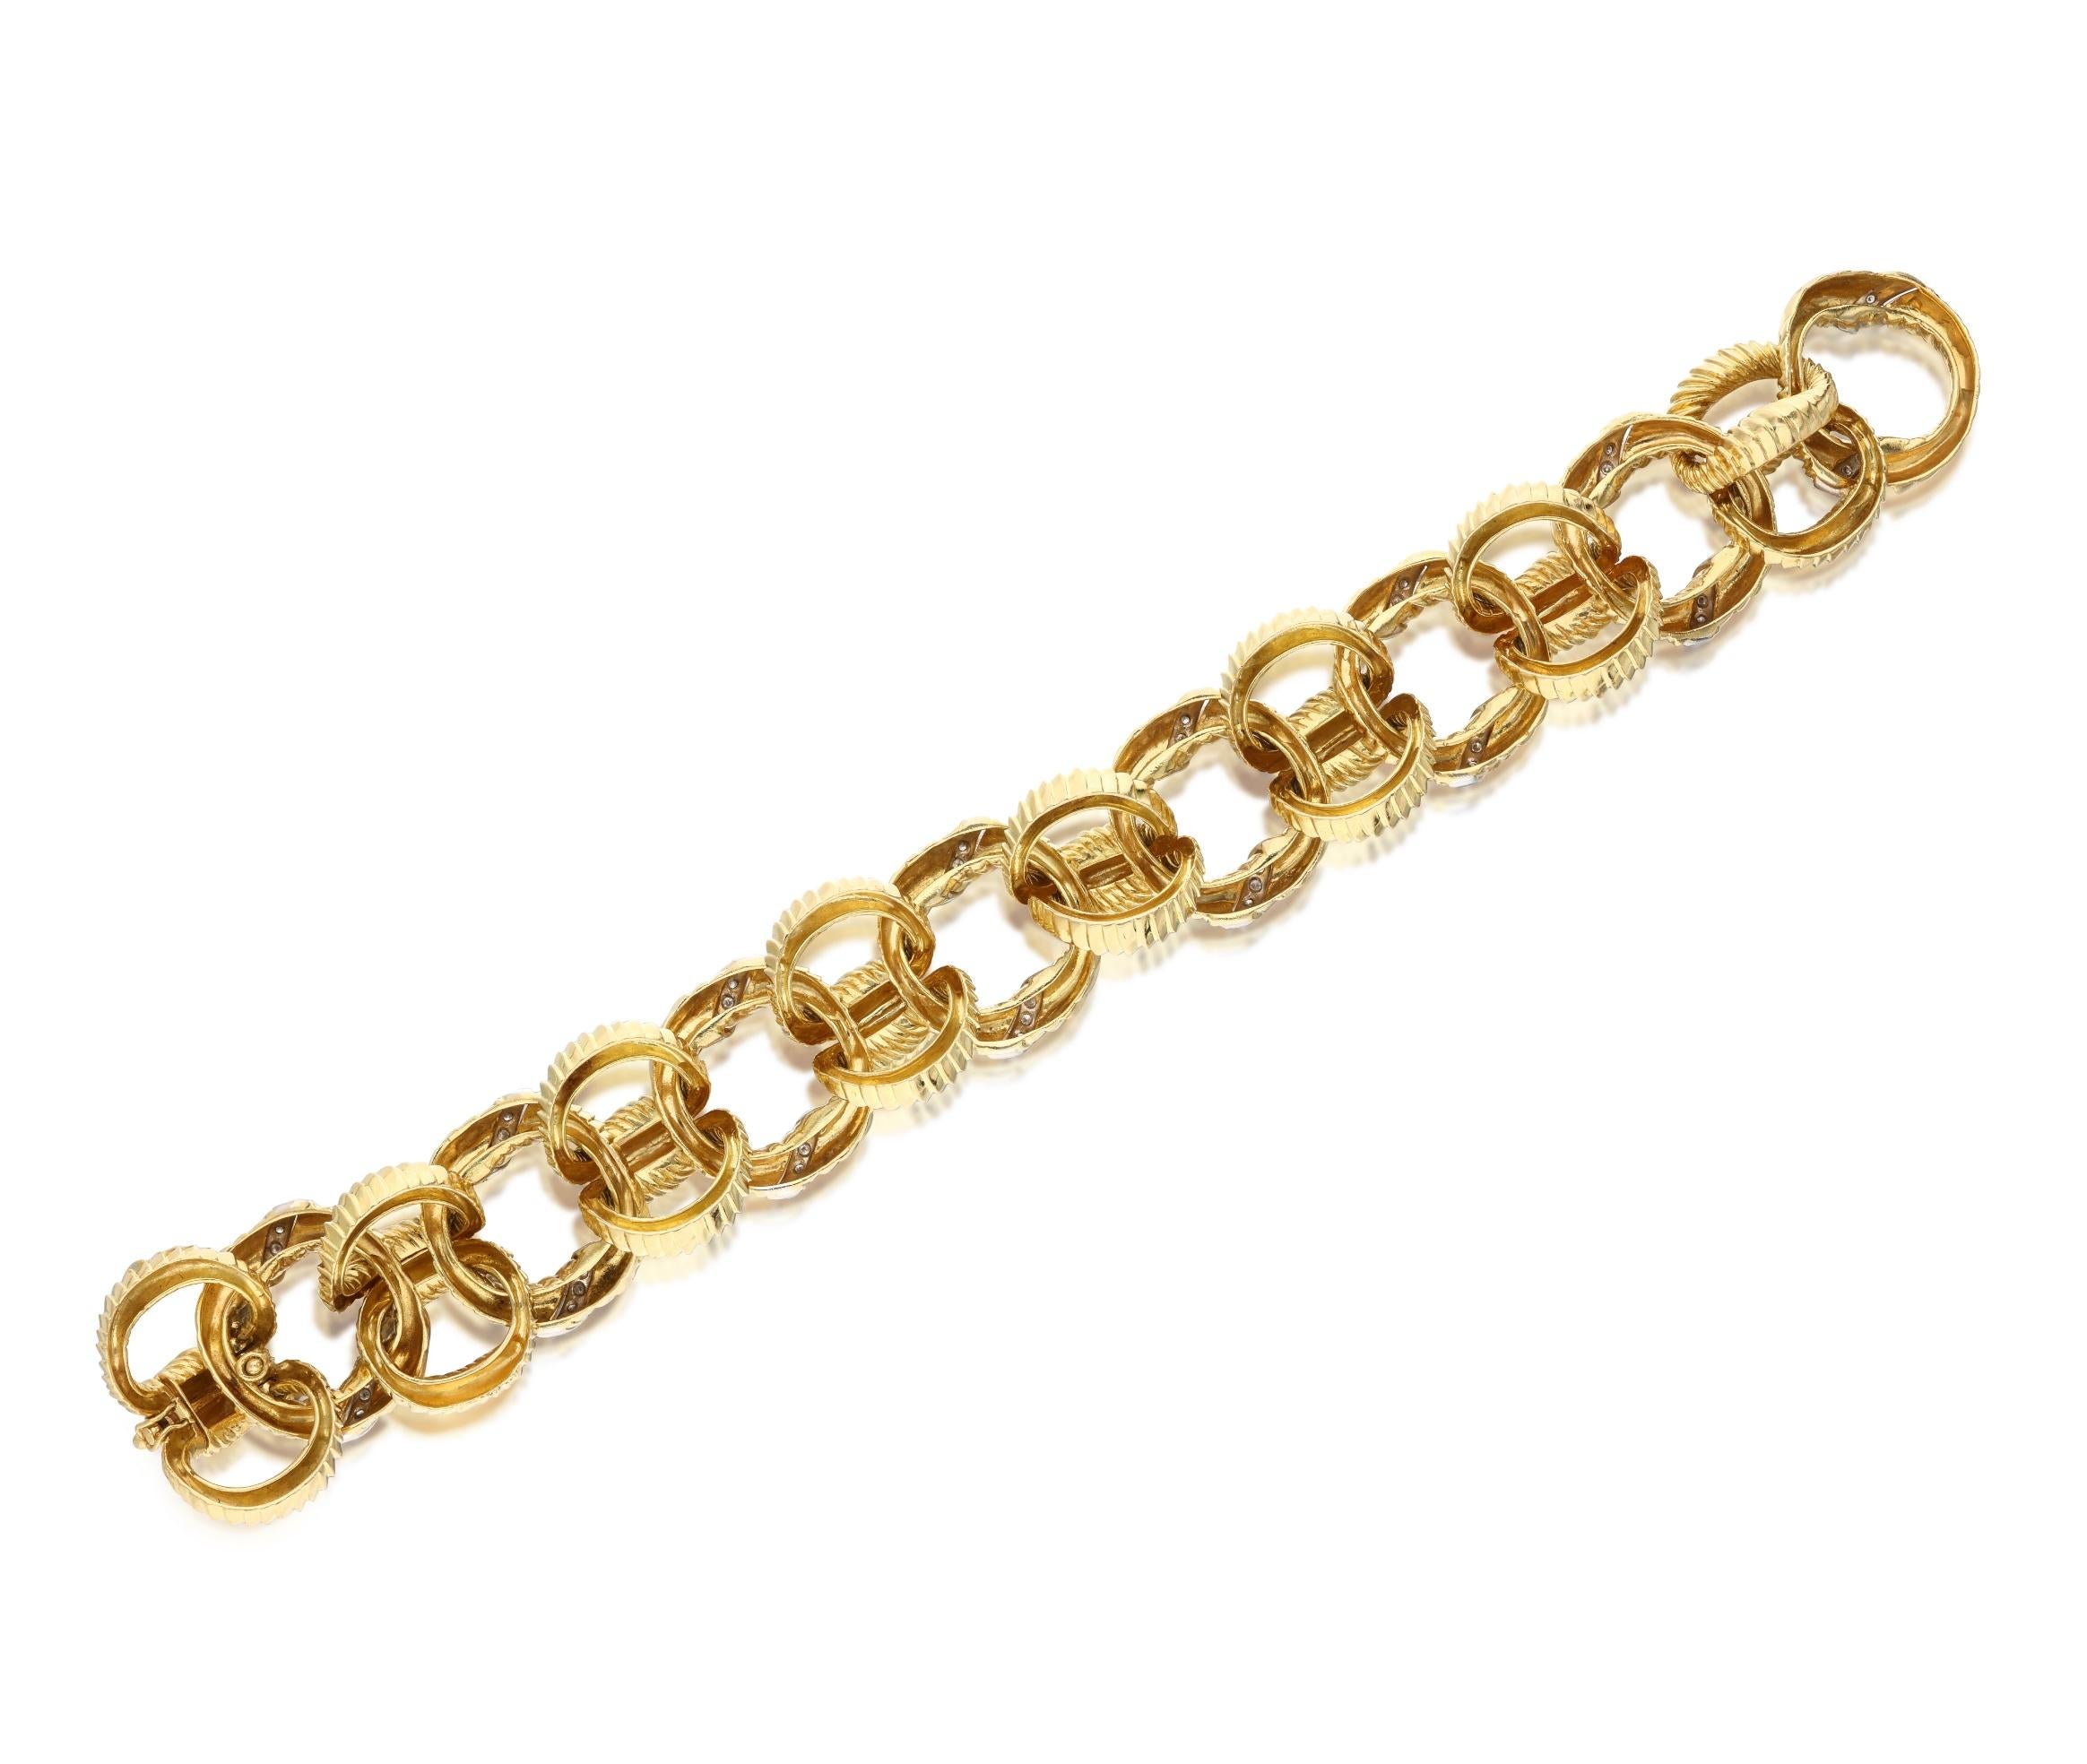 An 18 karat yellow gold textured link bracelet accented by diamonds. The round cut diamonds weigh a total of approximately 1 carat, and are approximately G-H color and VS clarity. Total weight: 105.20 grams. Length: 9 inches.
